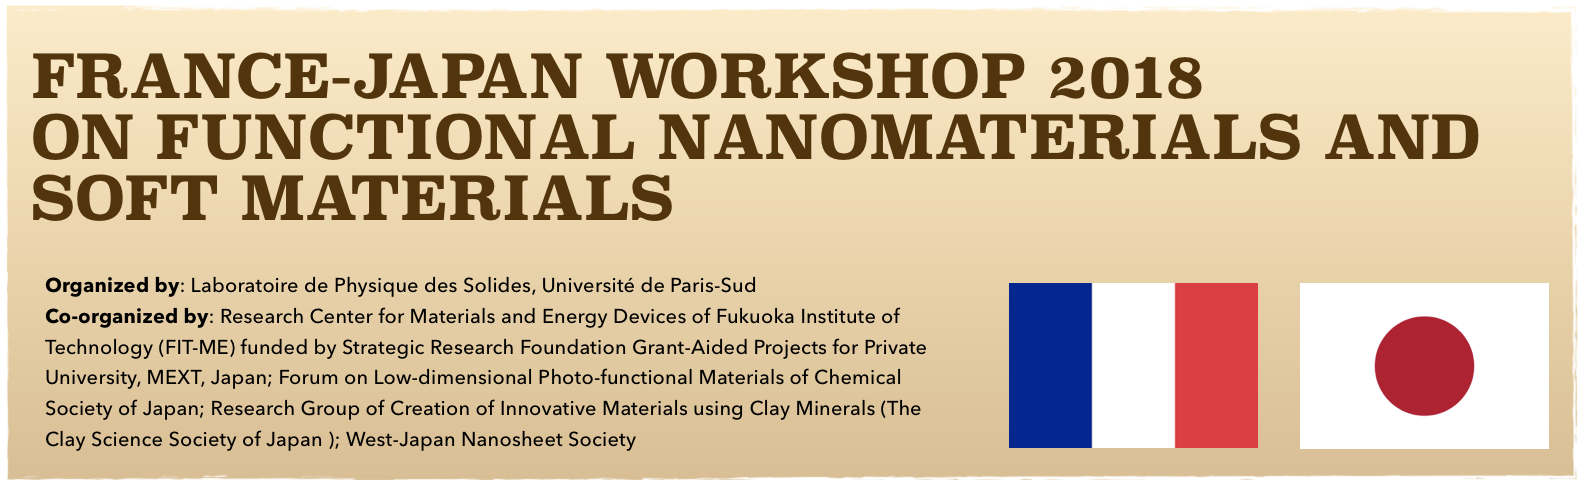 France-Japan Workshop 2018
on Functional Nanomaterials and SOFT MaterialsOrganized by: Laboratoire de Physique des Solides, Université de Paris-Sud
Co-organized by: Research Center for Materials and Energy Devices of Fukuoka Institute of Technology (FIT-ME) funded by Strategic Research Foundation Grant-Aided Projects for Private University, MEXT, Japan; Forum on Low-dimensional Photo-functional Materials of Chemical Society of Japan; Research Group of Creation of Innovative Materials using Clay Minerals (The Clay Science Society of Japan ); West-Japan Nanosheet Society